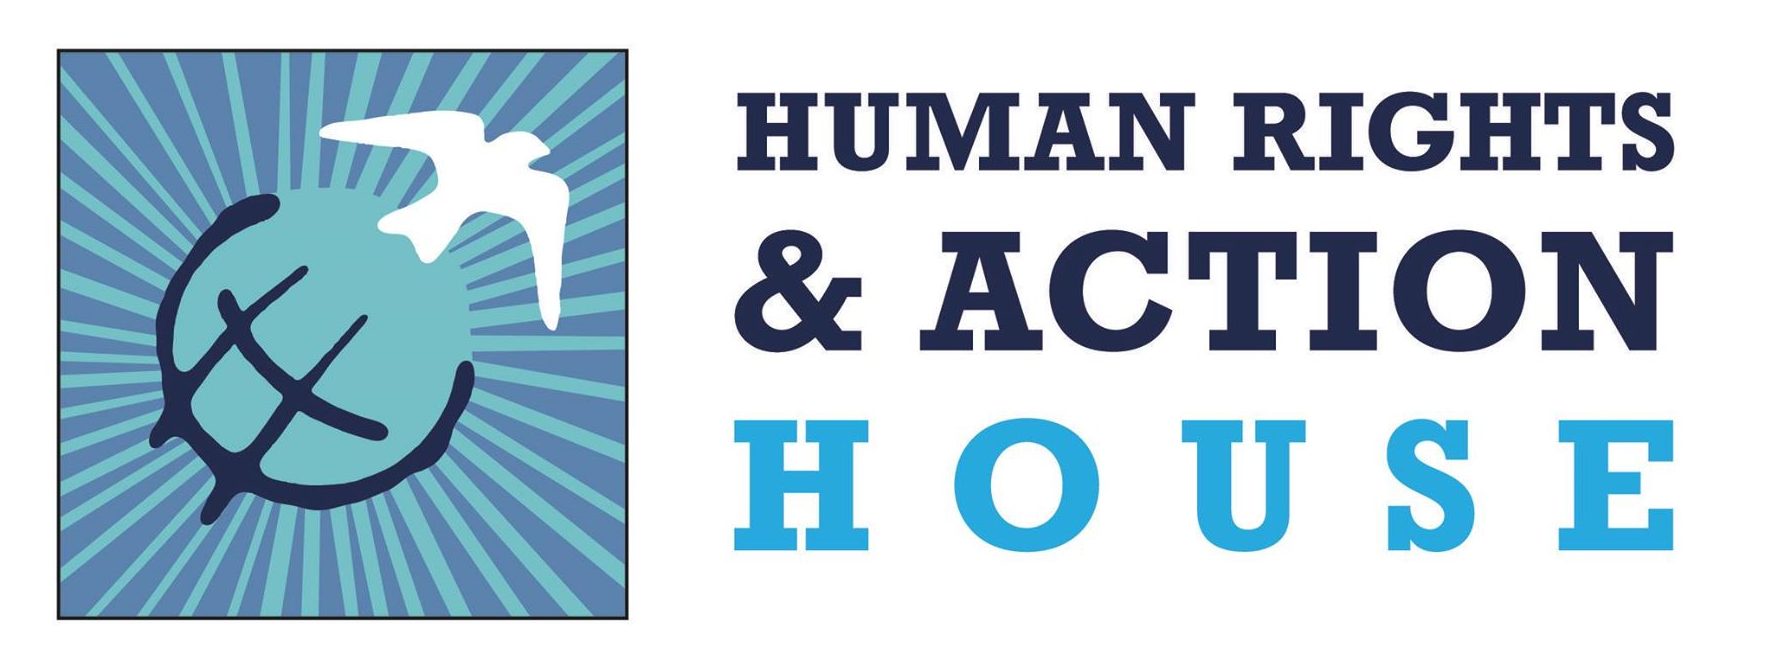 Human rights & Action House